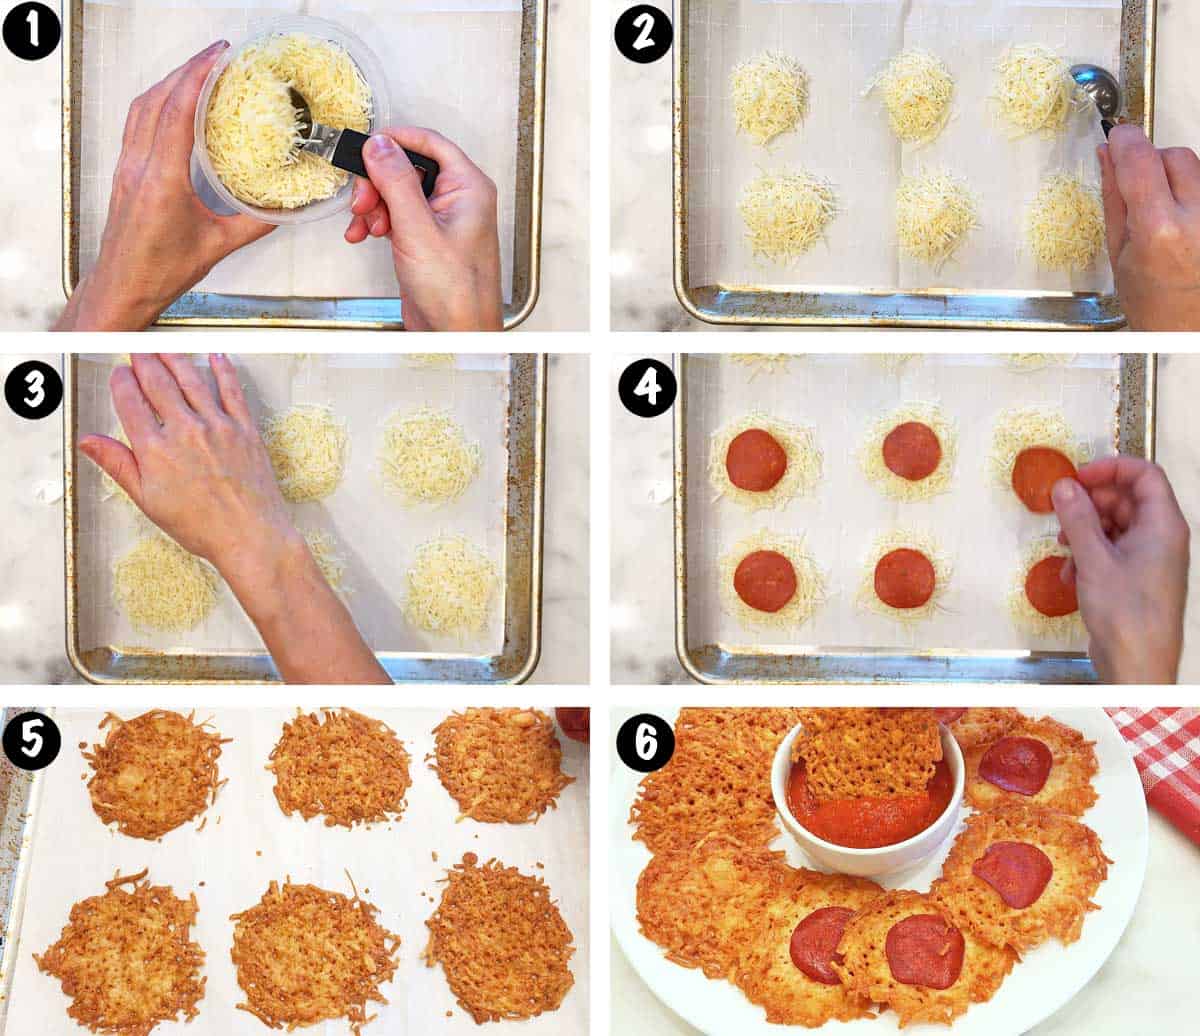 A six-photo collage showing the steps for making parmesan crisps. 